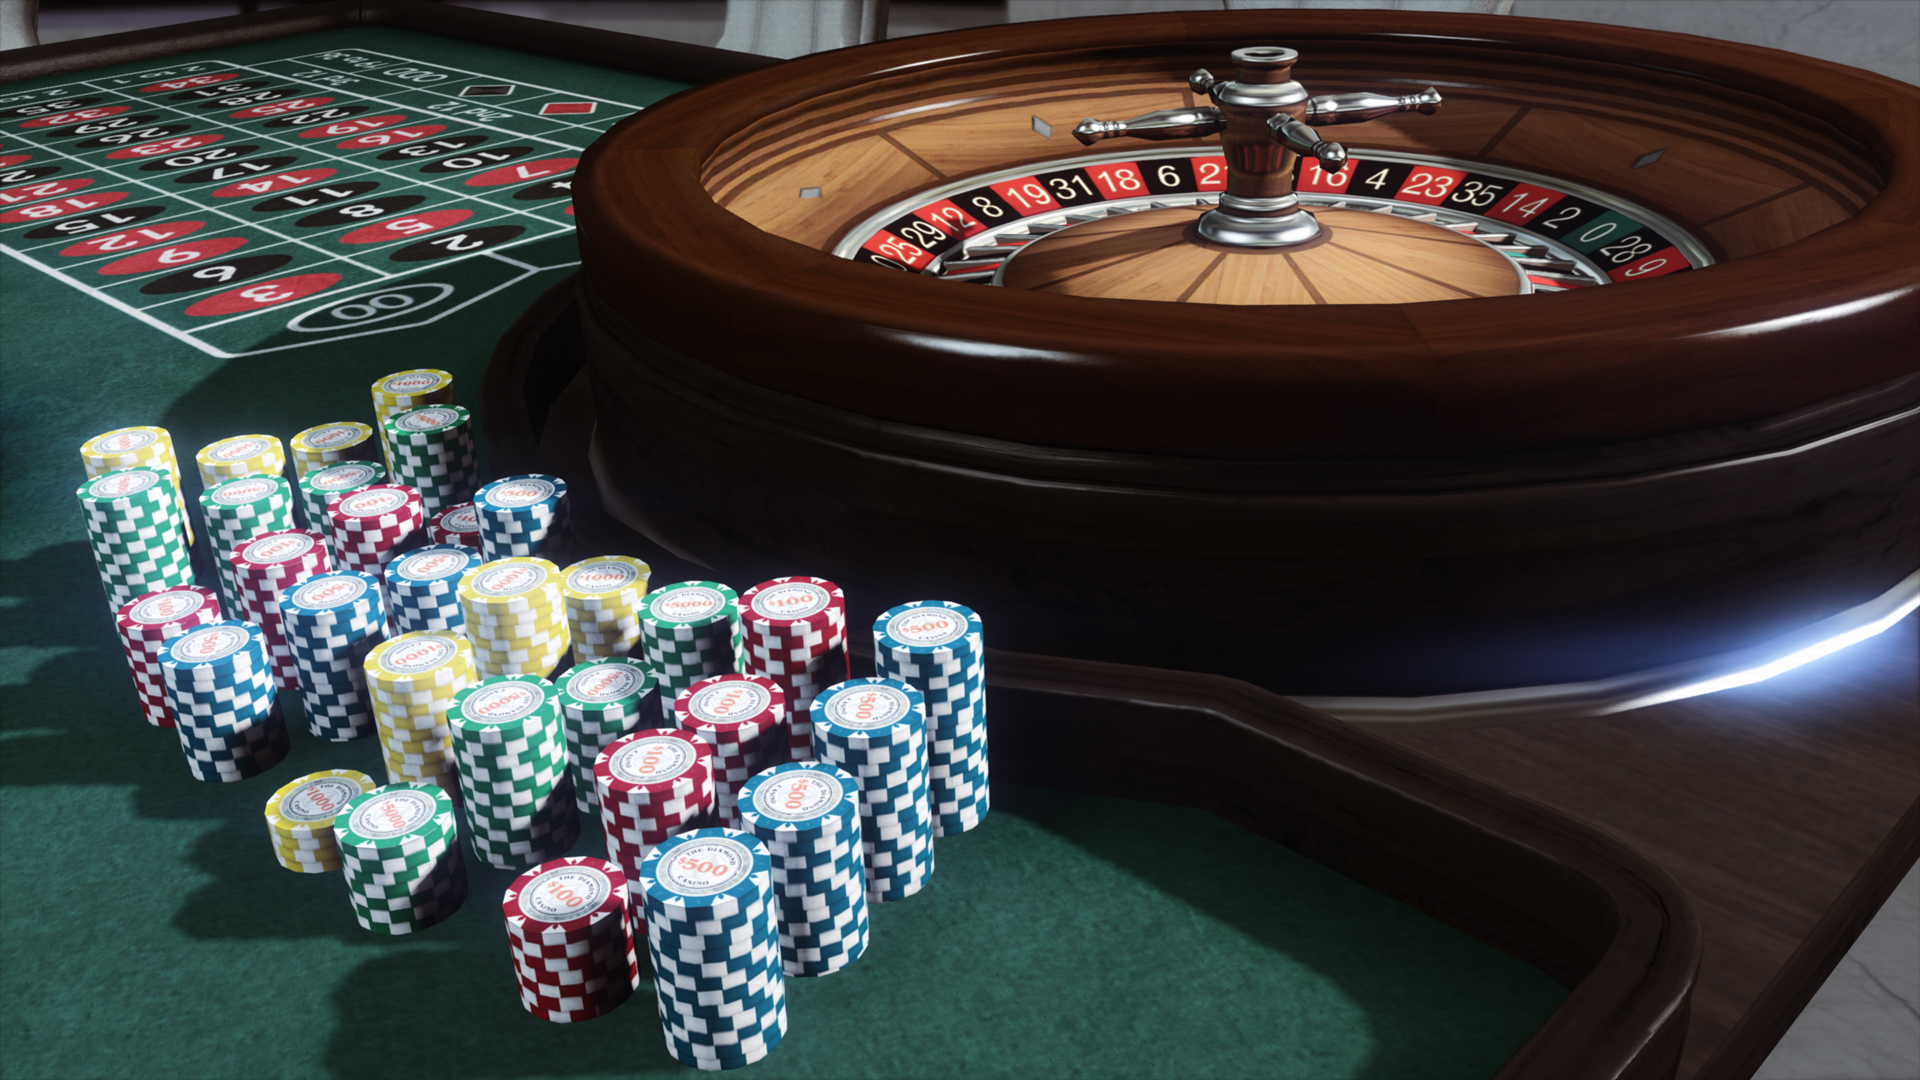 The Three Things That Gives Value With Online Casinos